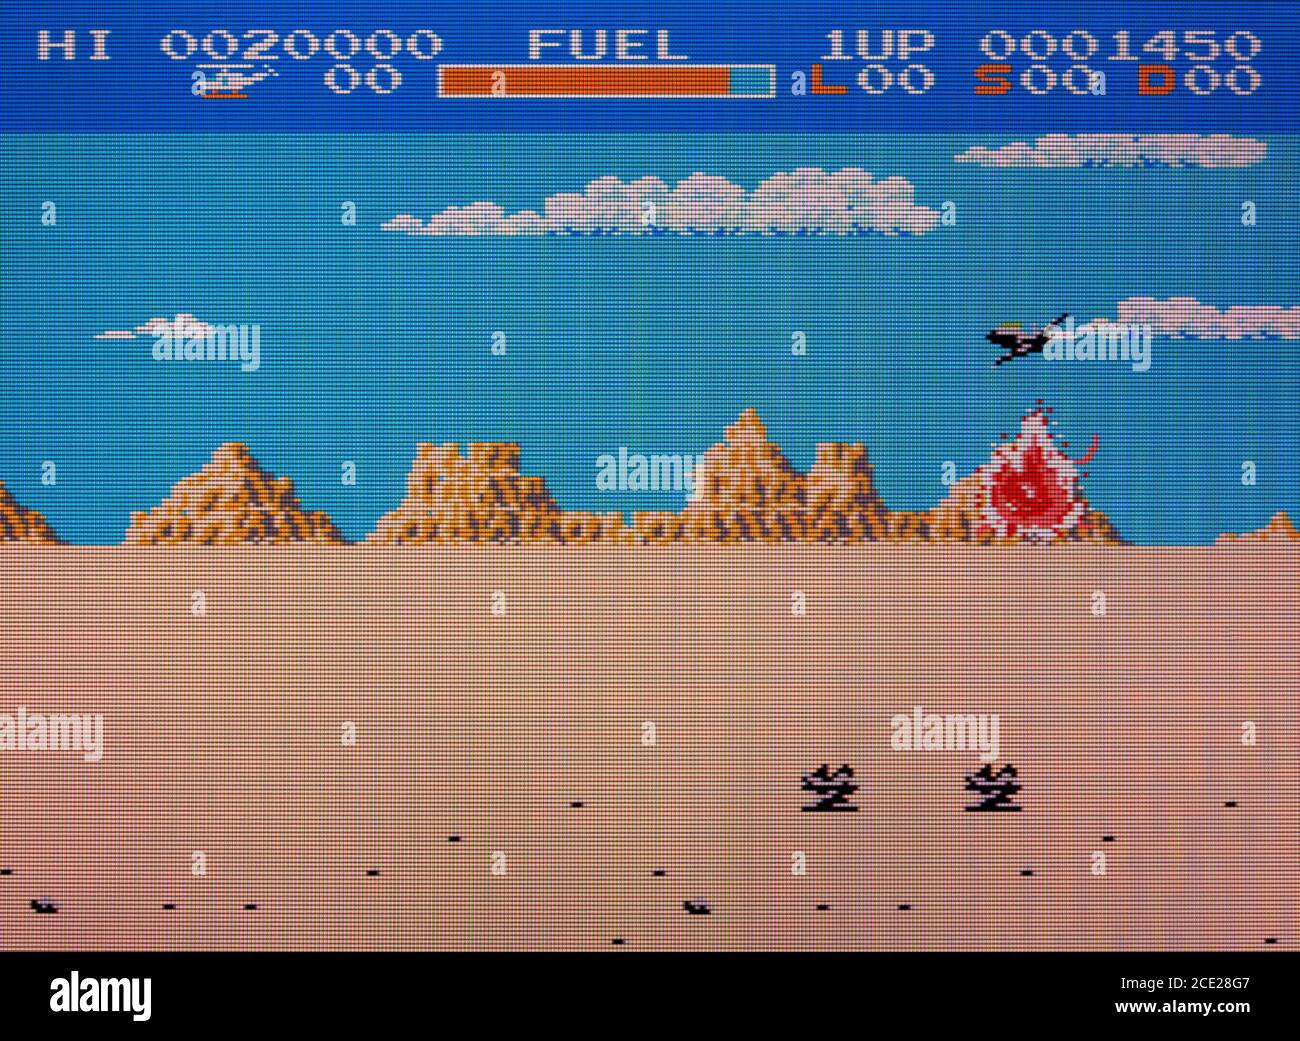 Choplifter - Nintendo Entertainment System - NES Videogame - Editorial use only Stock Photo